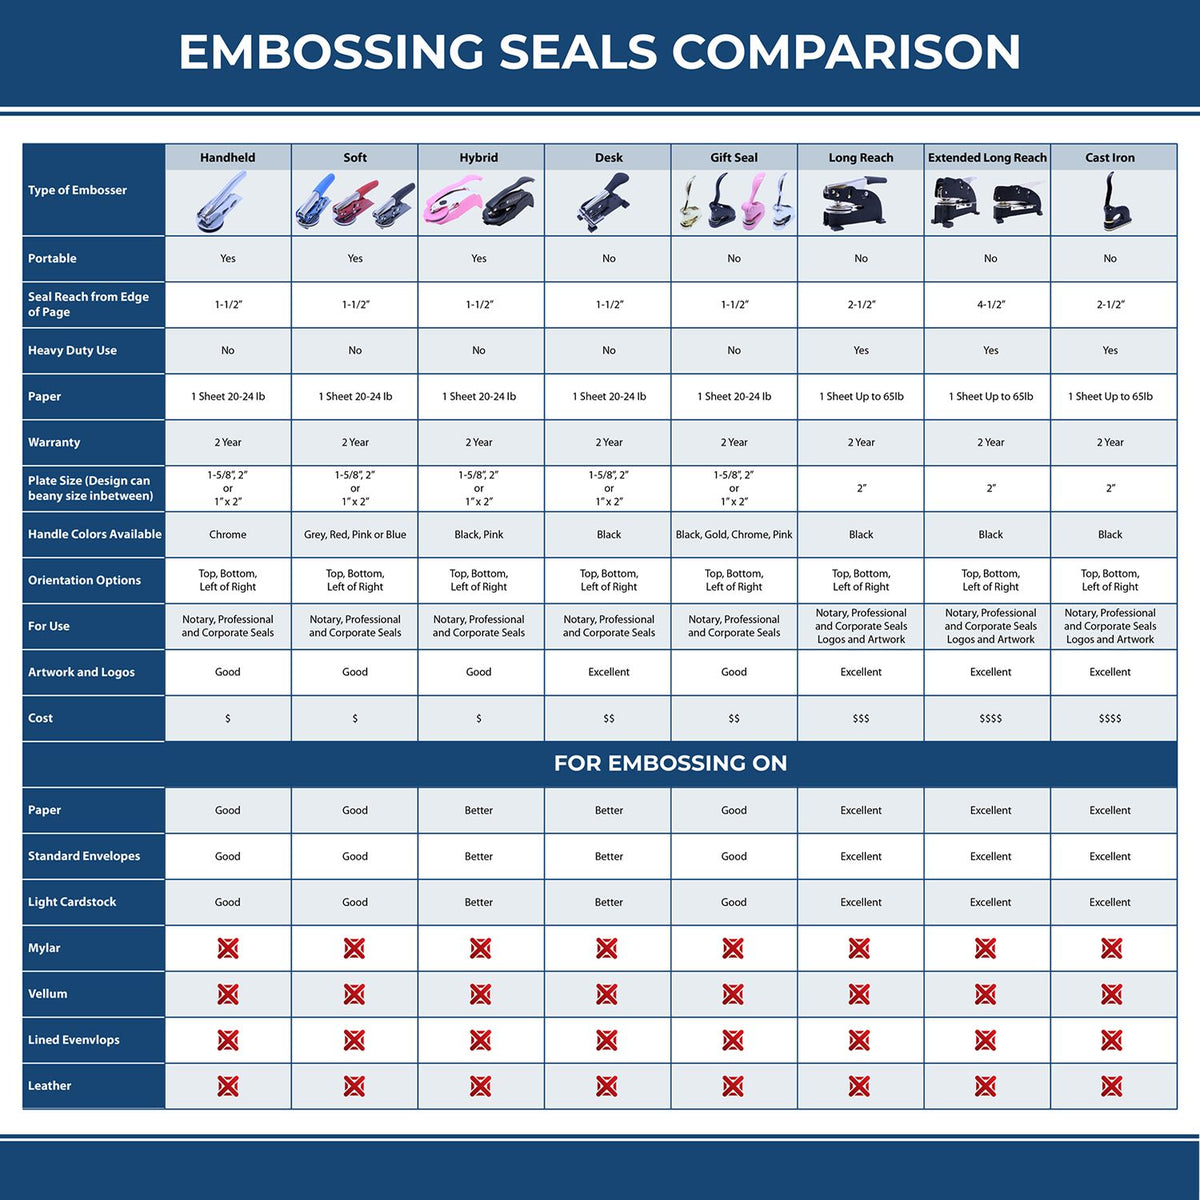 A comparison chart for the different types of mount models available for the Long Reach Florida Land Surveyor Seal.